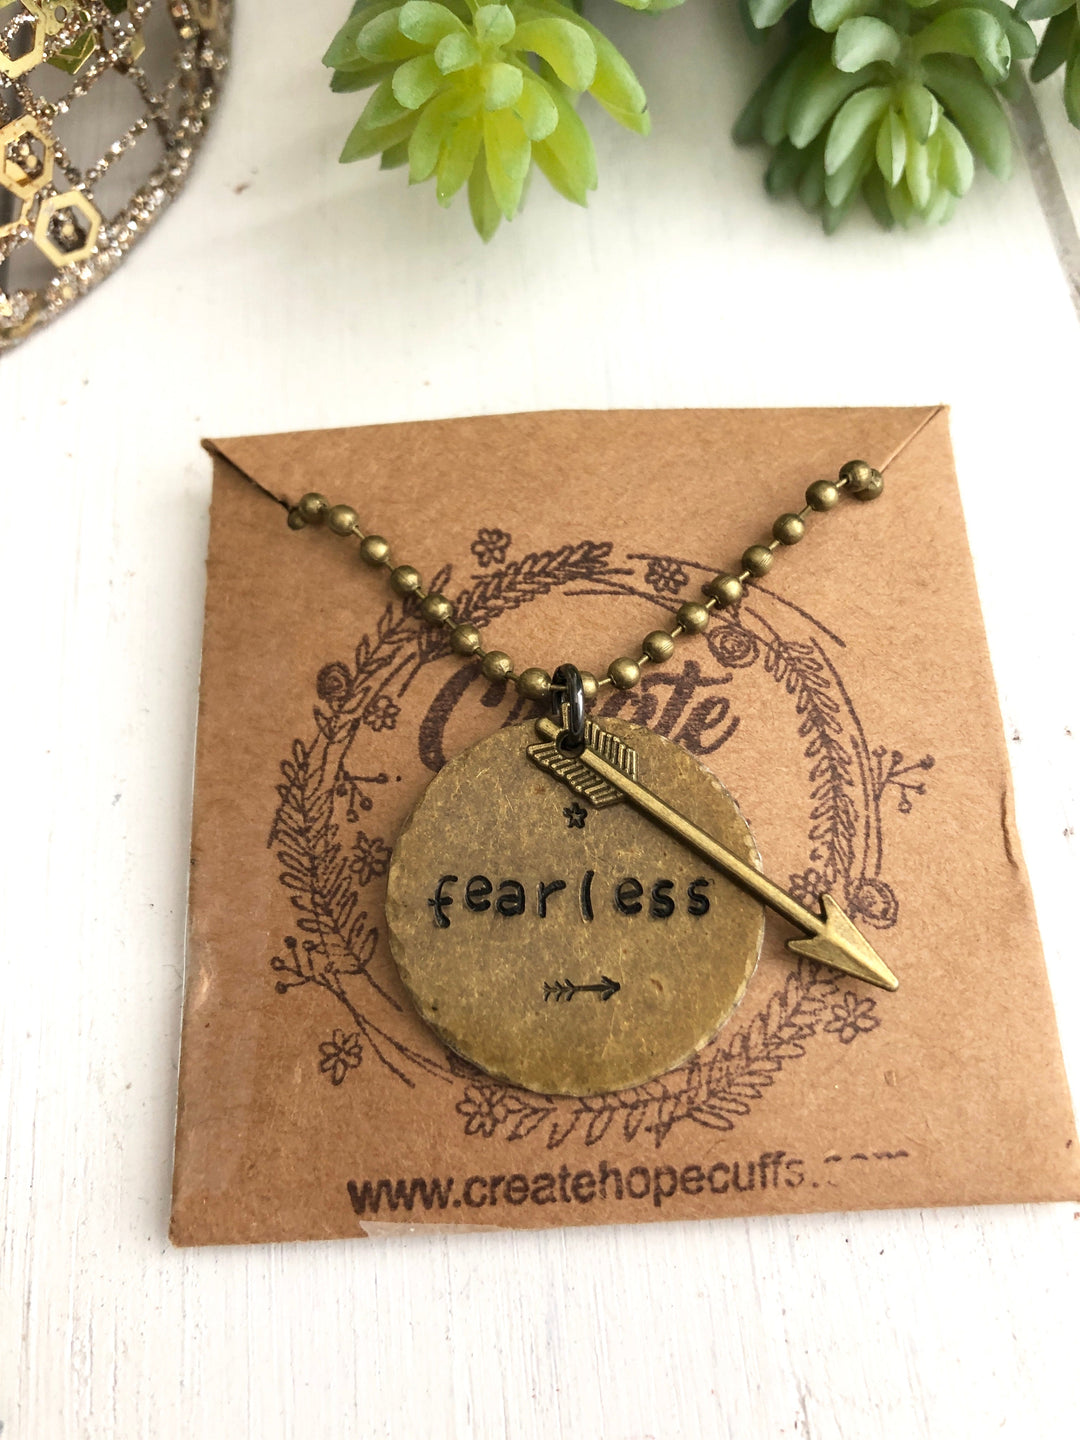 Vintage Necklaces, Antiqued Bronze Inspirational Ball Necklace, Dreamer, Brave, Fearless, Hope, Believe with Arrow Charm Vintage Necklace Create Hope Cuffs 